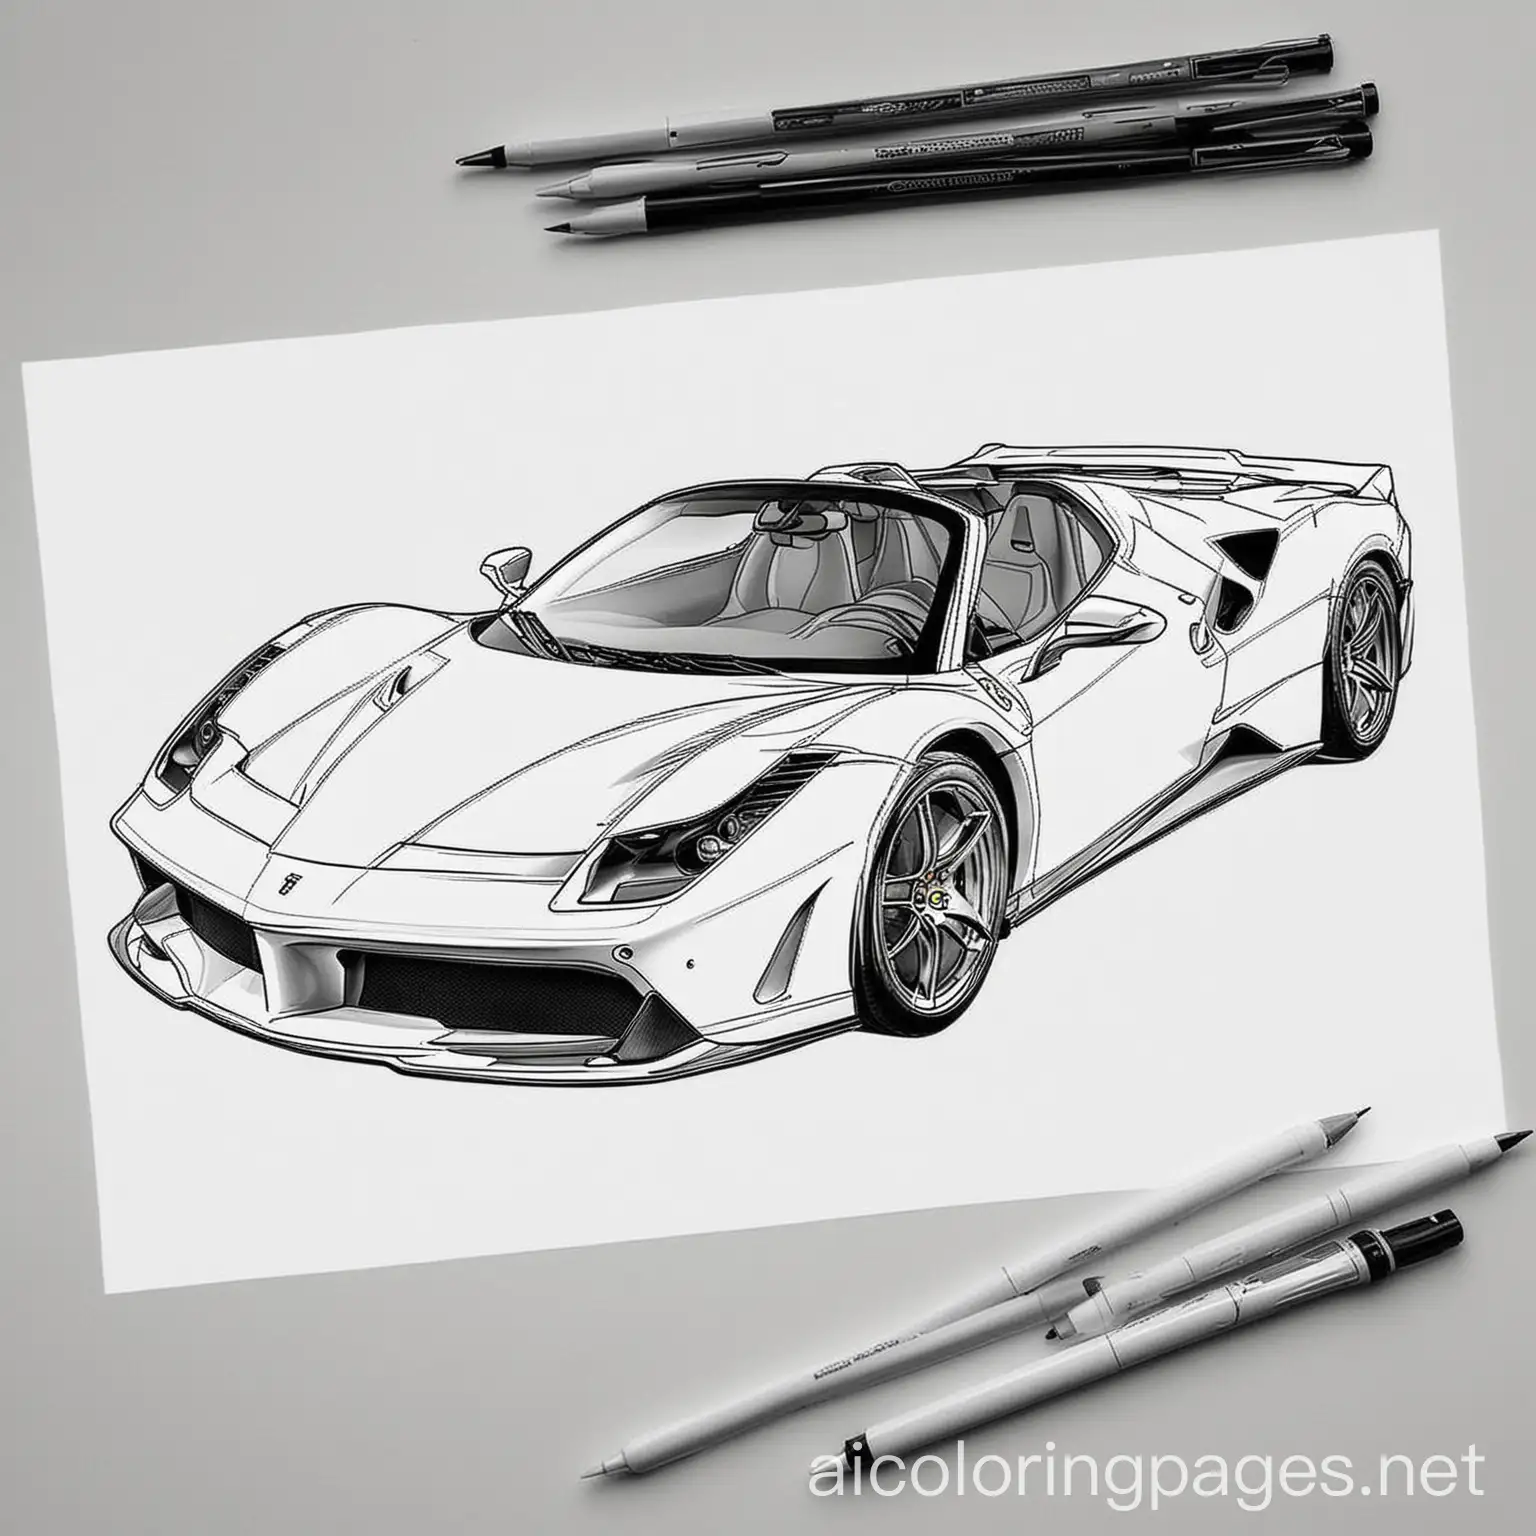 Ferrari car coloring page, Coloring Page, black and white, line art, white background, Simplicity, Ample White Space. The background of the coloring page is plain white to make it easy for young children to color within the lines. The outlines of all the subjects are easy to distinguish, making it simple for kids to color without too much difficulty